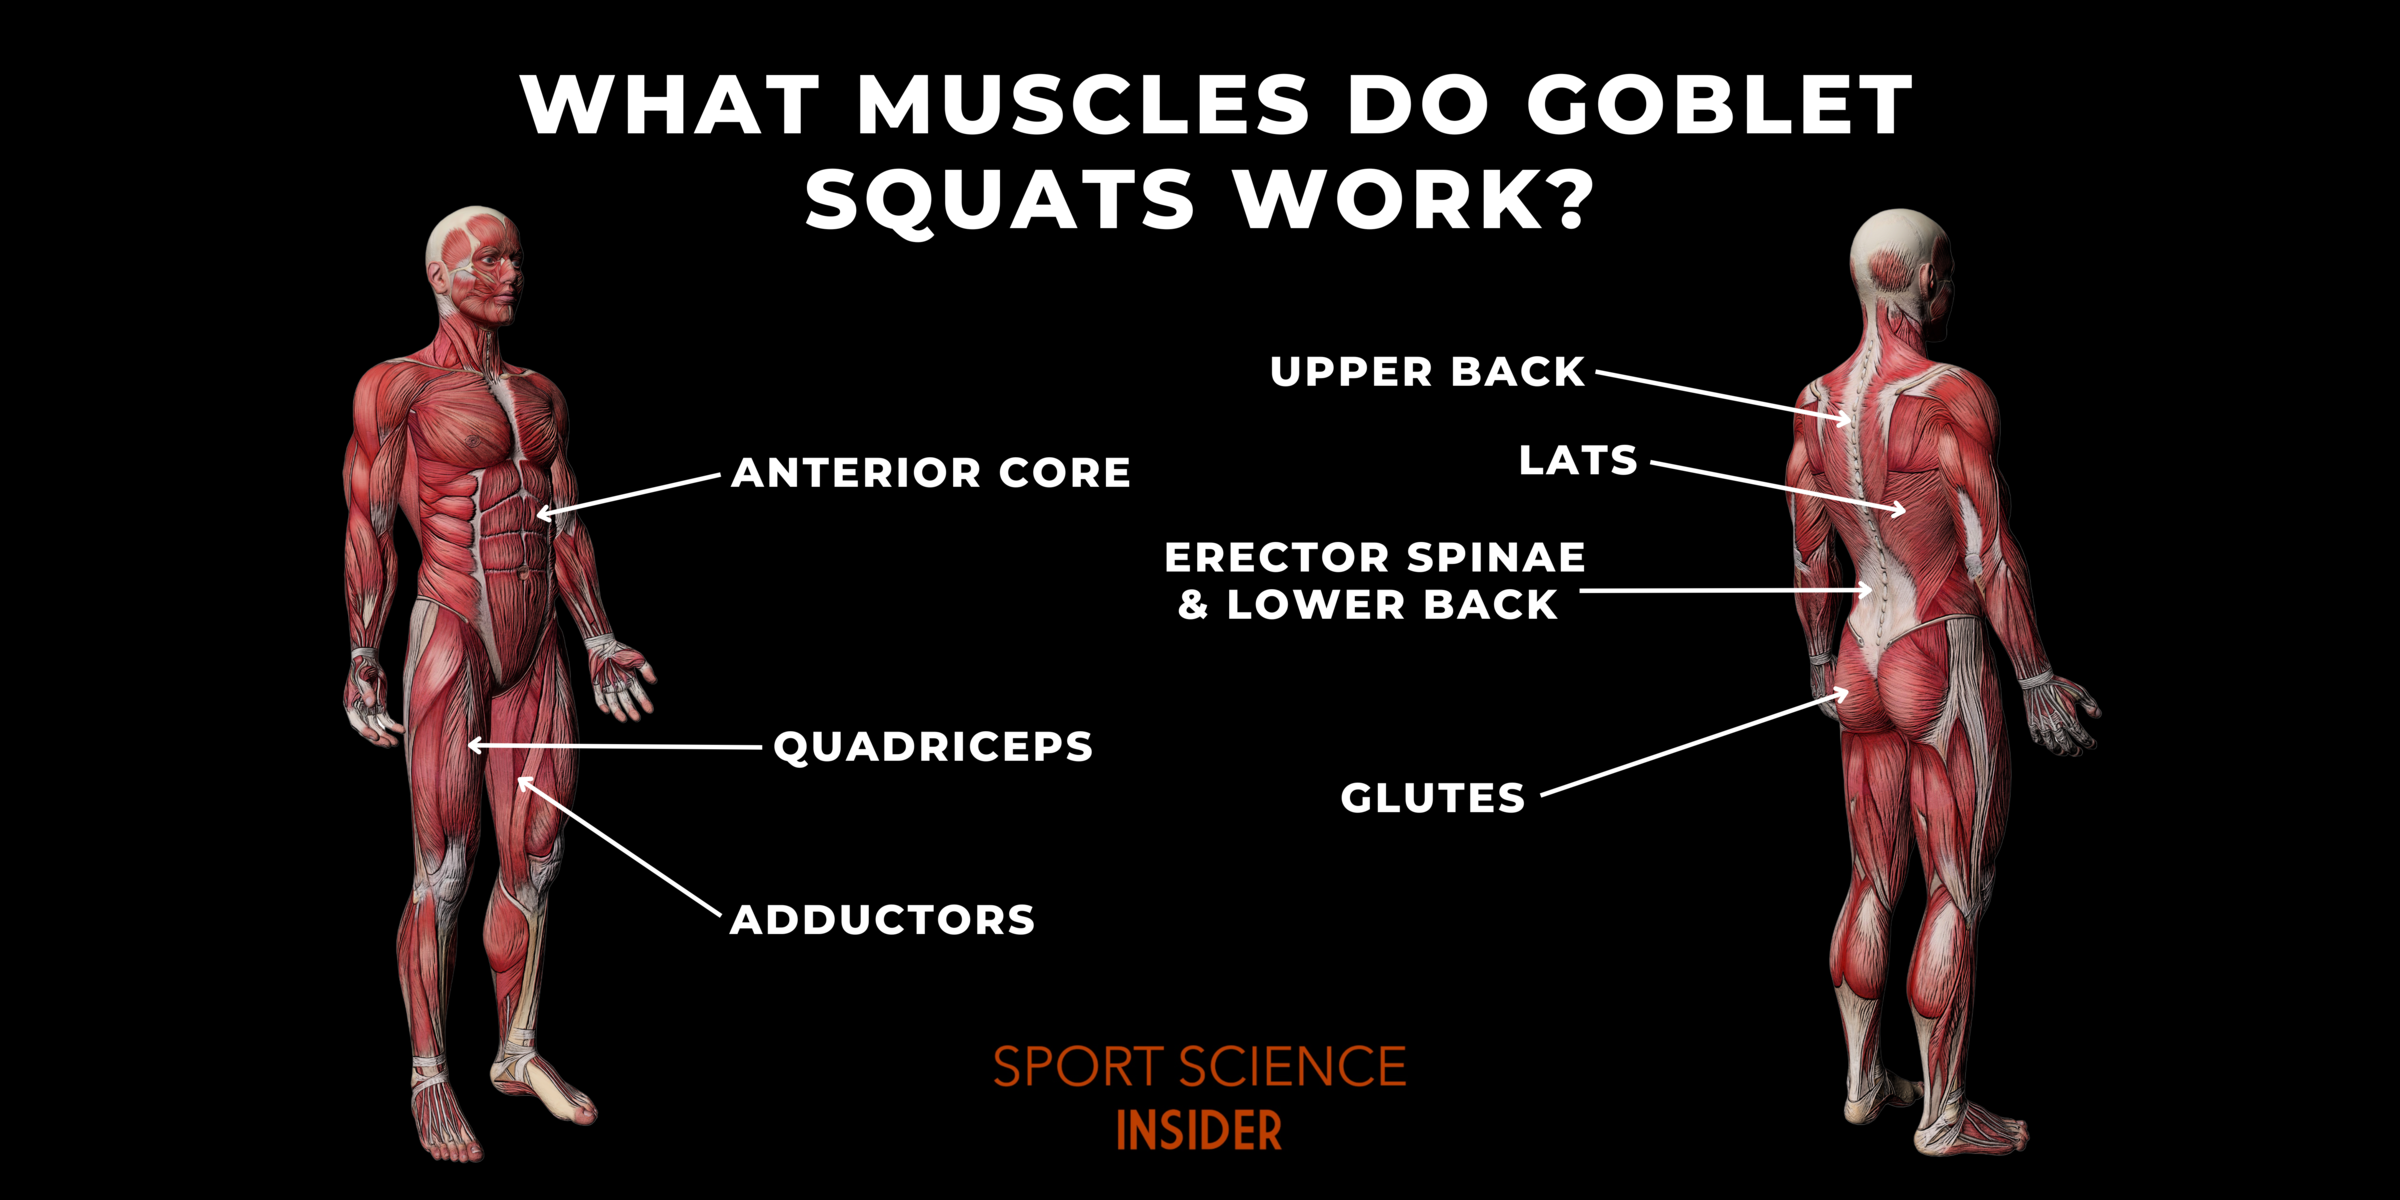 Labelled image of what muscles goblet squats work